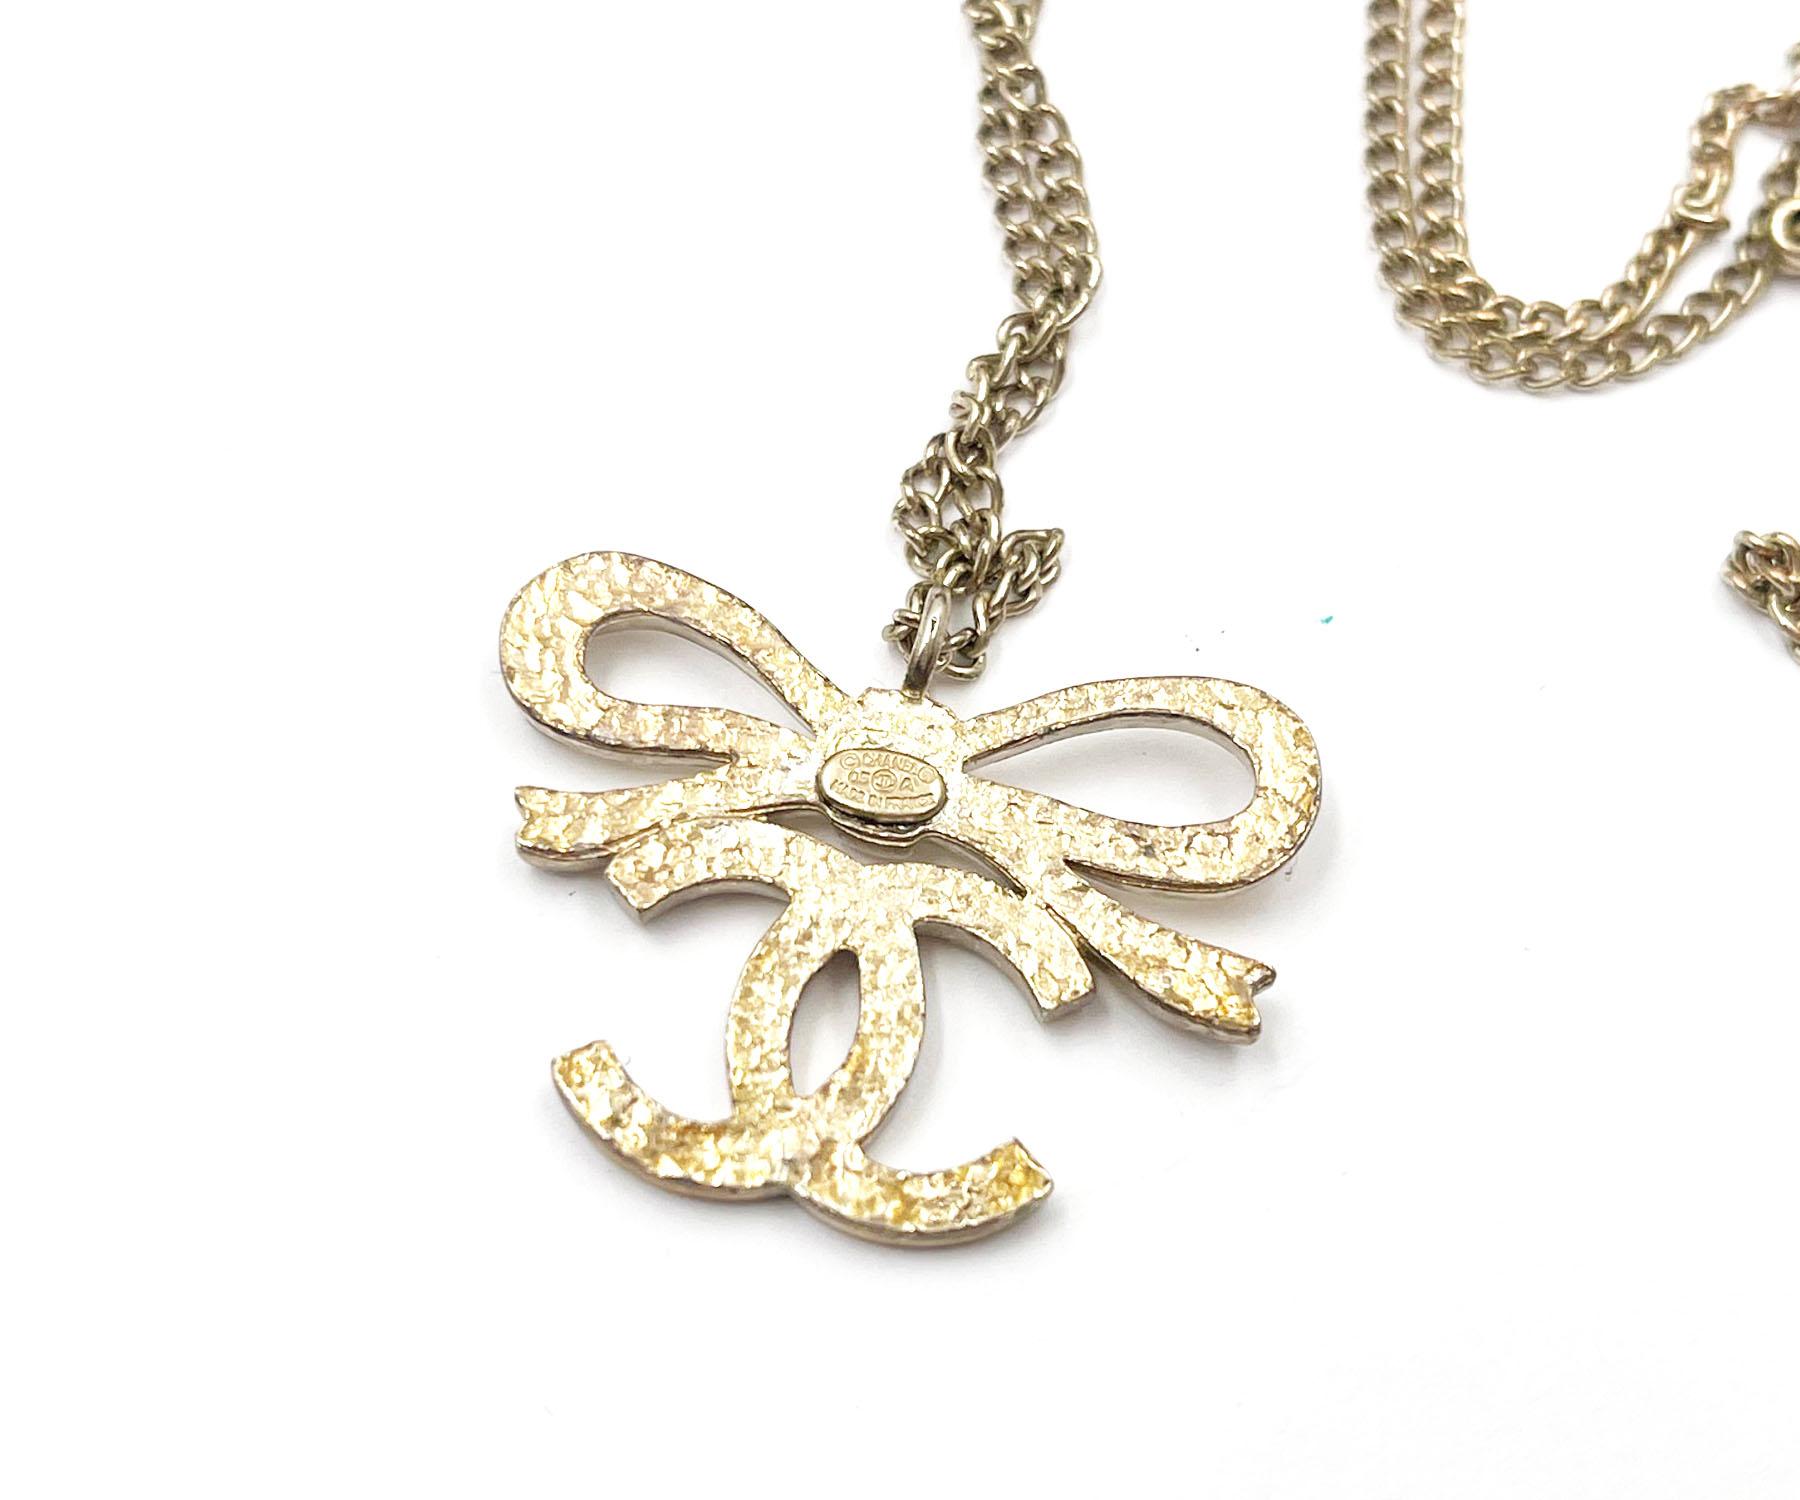 Chanel Light Gold Ribbon Bow CC Necklace   In Fair Condition For Sale In Pasadena, CA